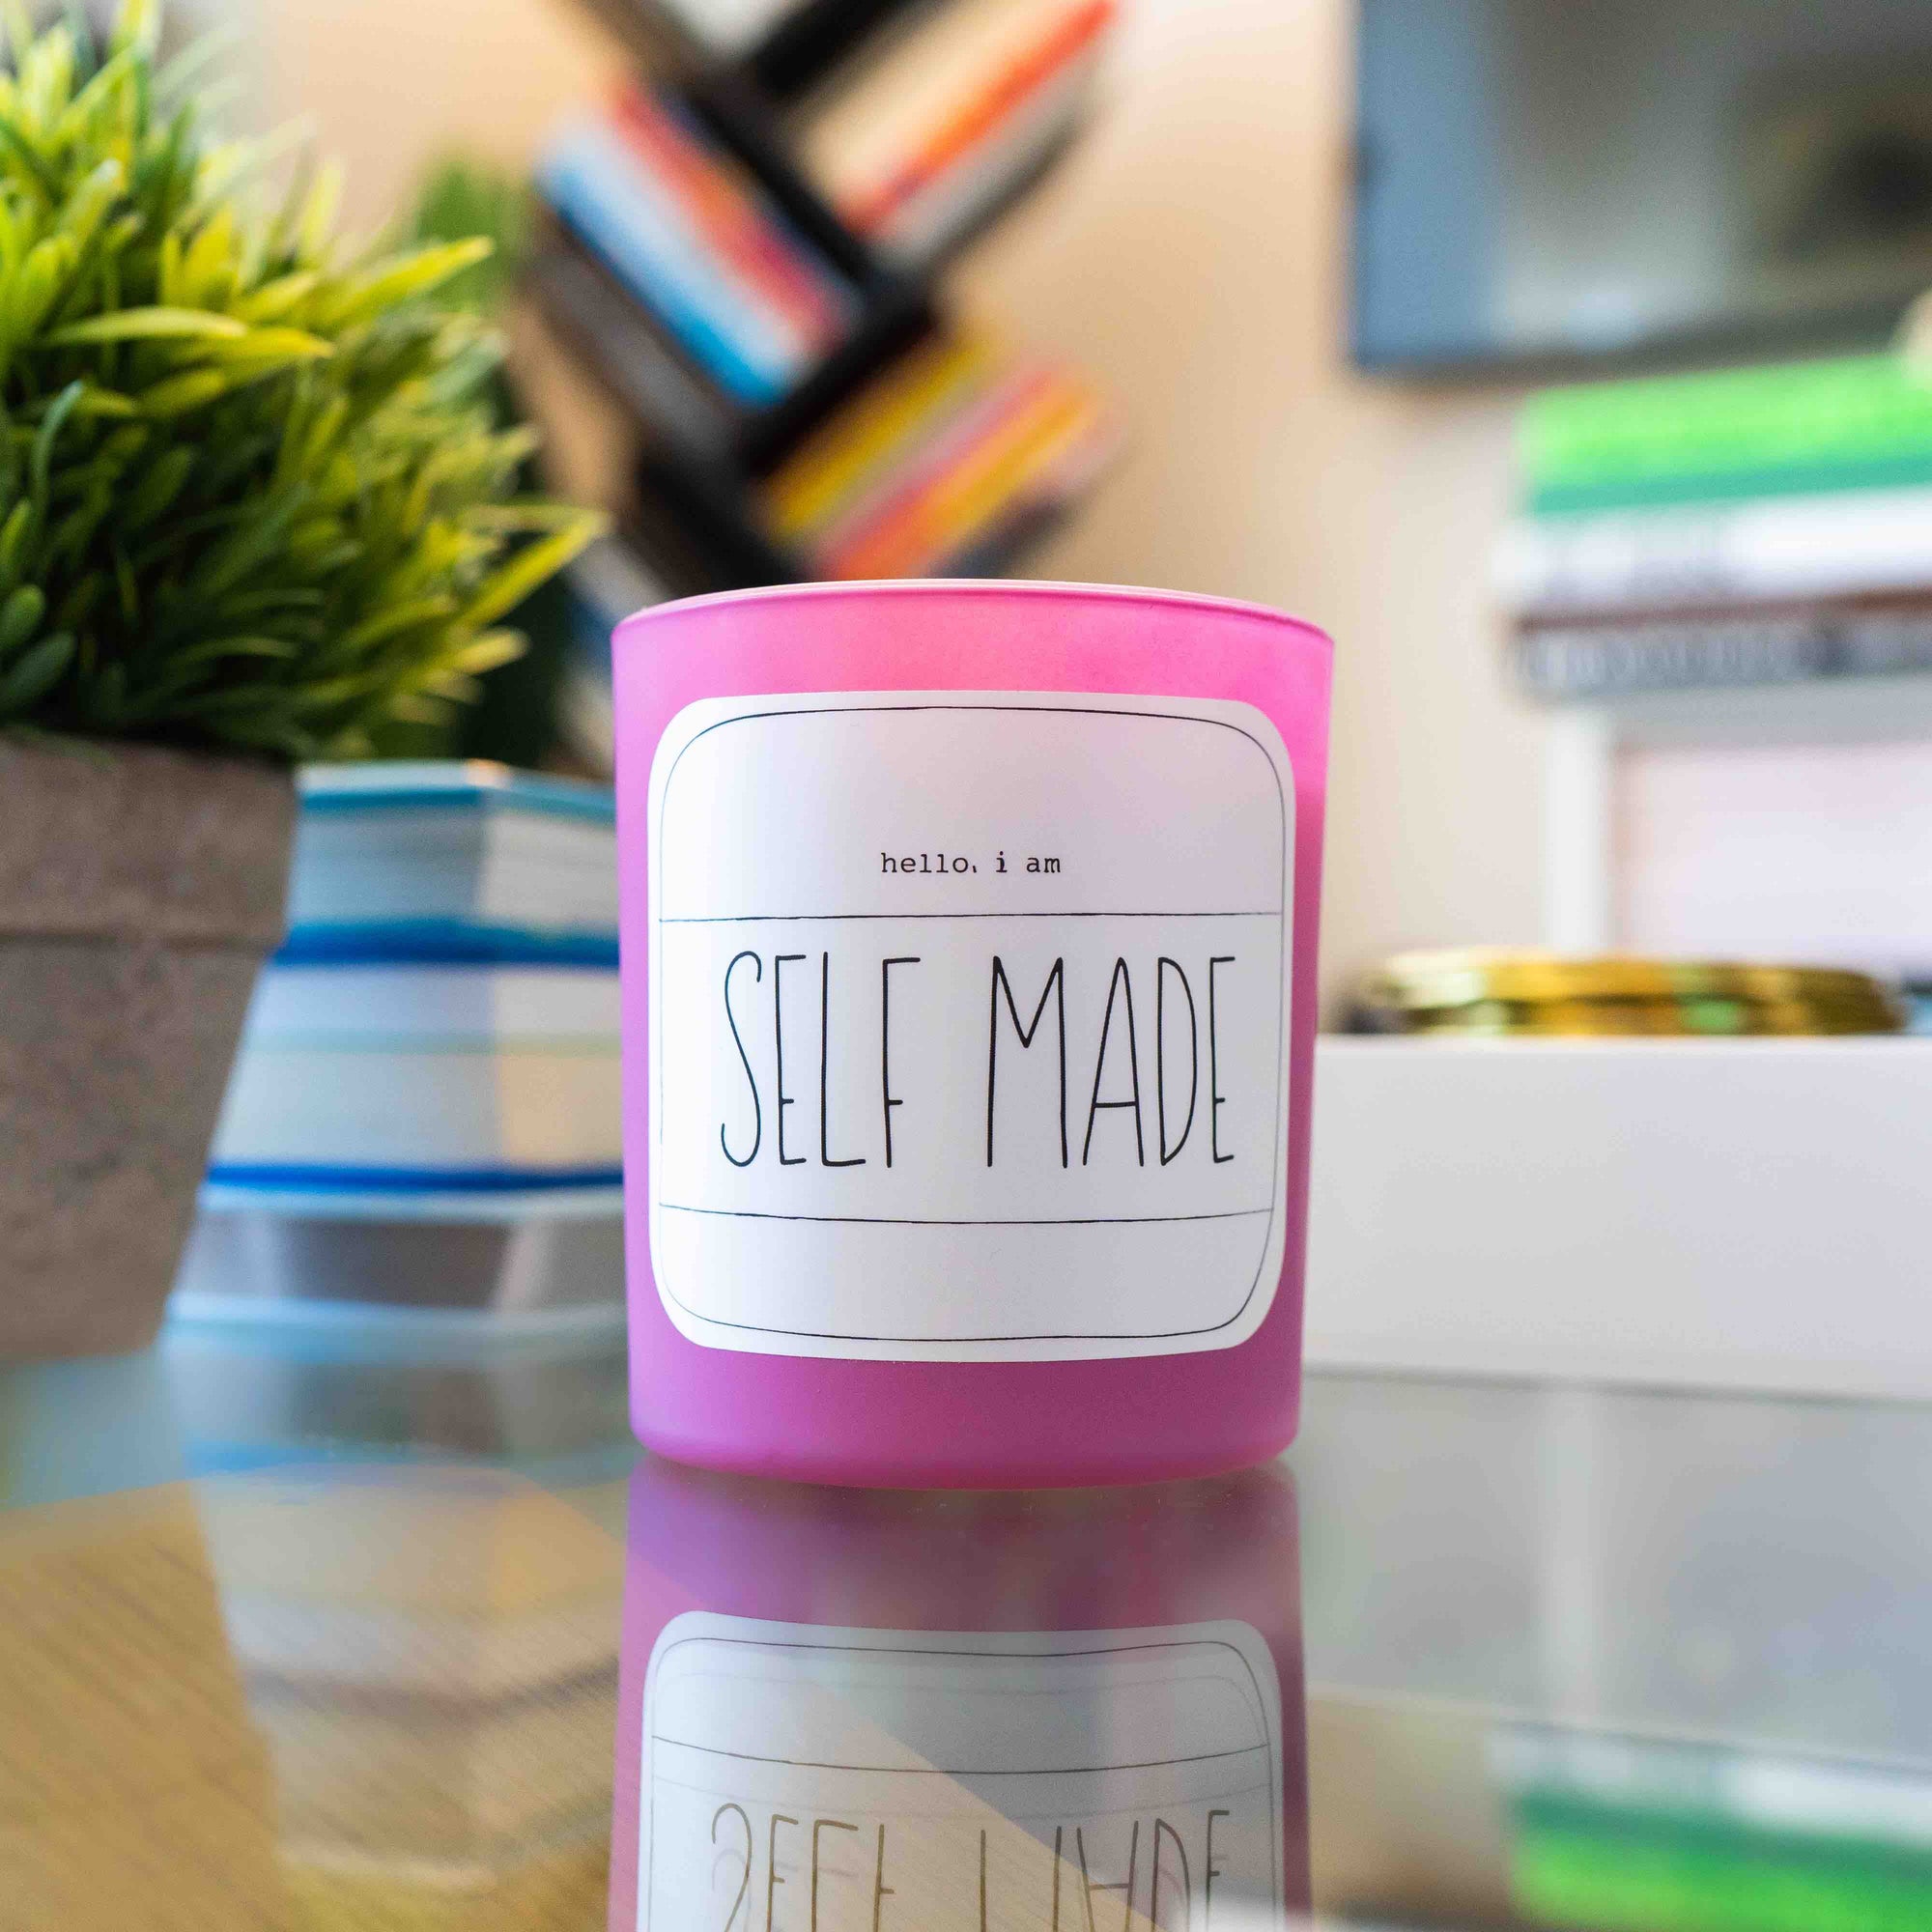 Self Made Candle - New Mindset, Who Dis?